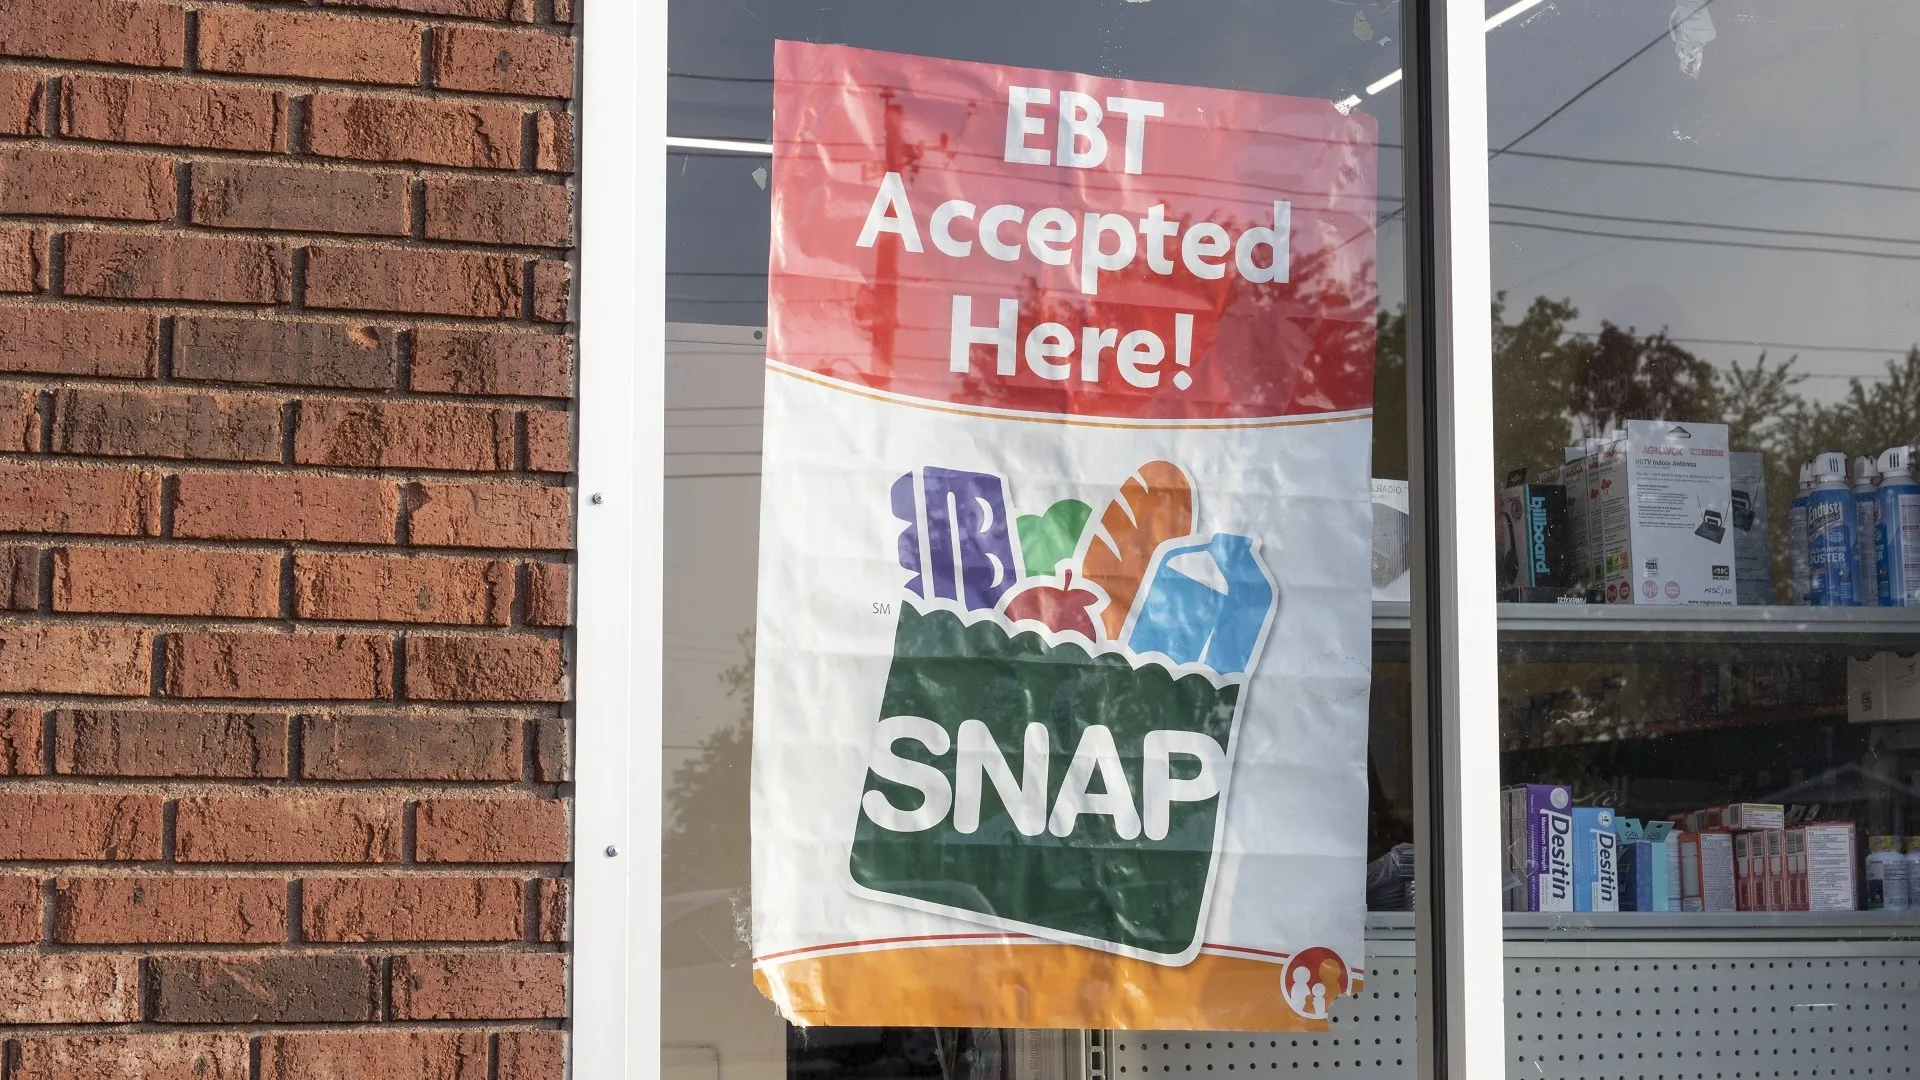 EBT theft could be thwarted by new ebtEDGE app